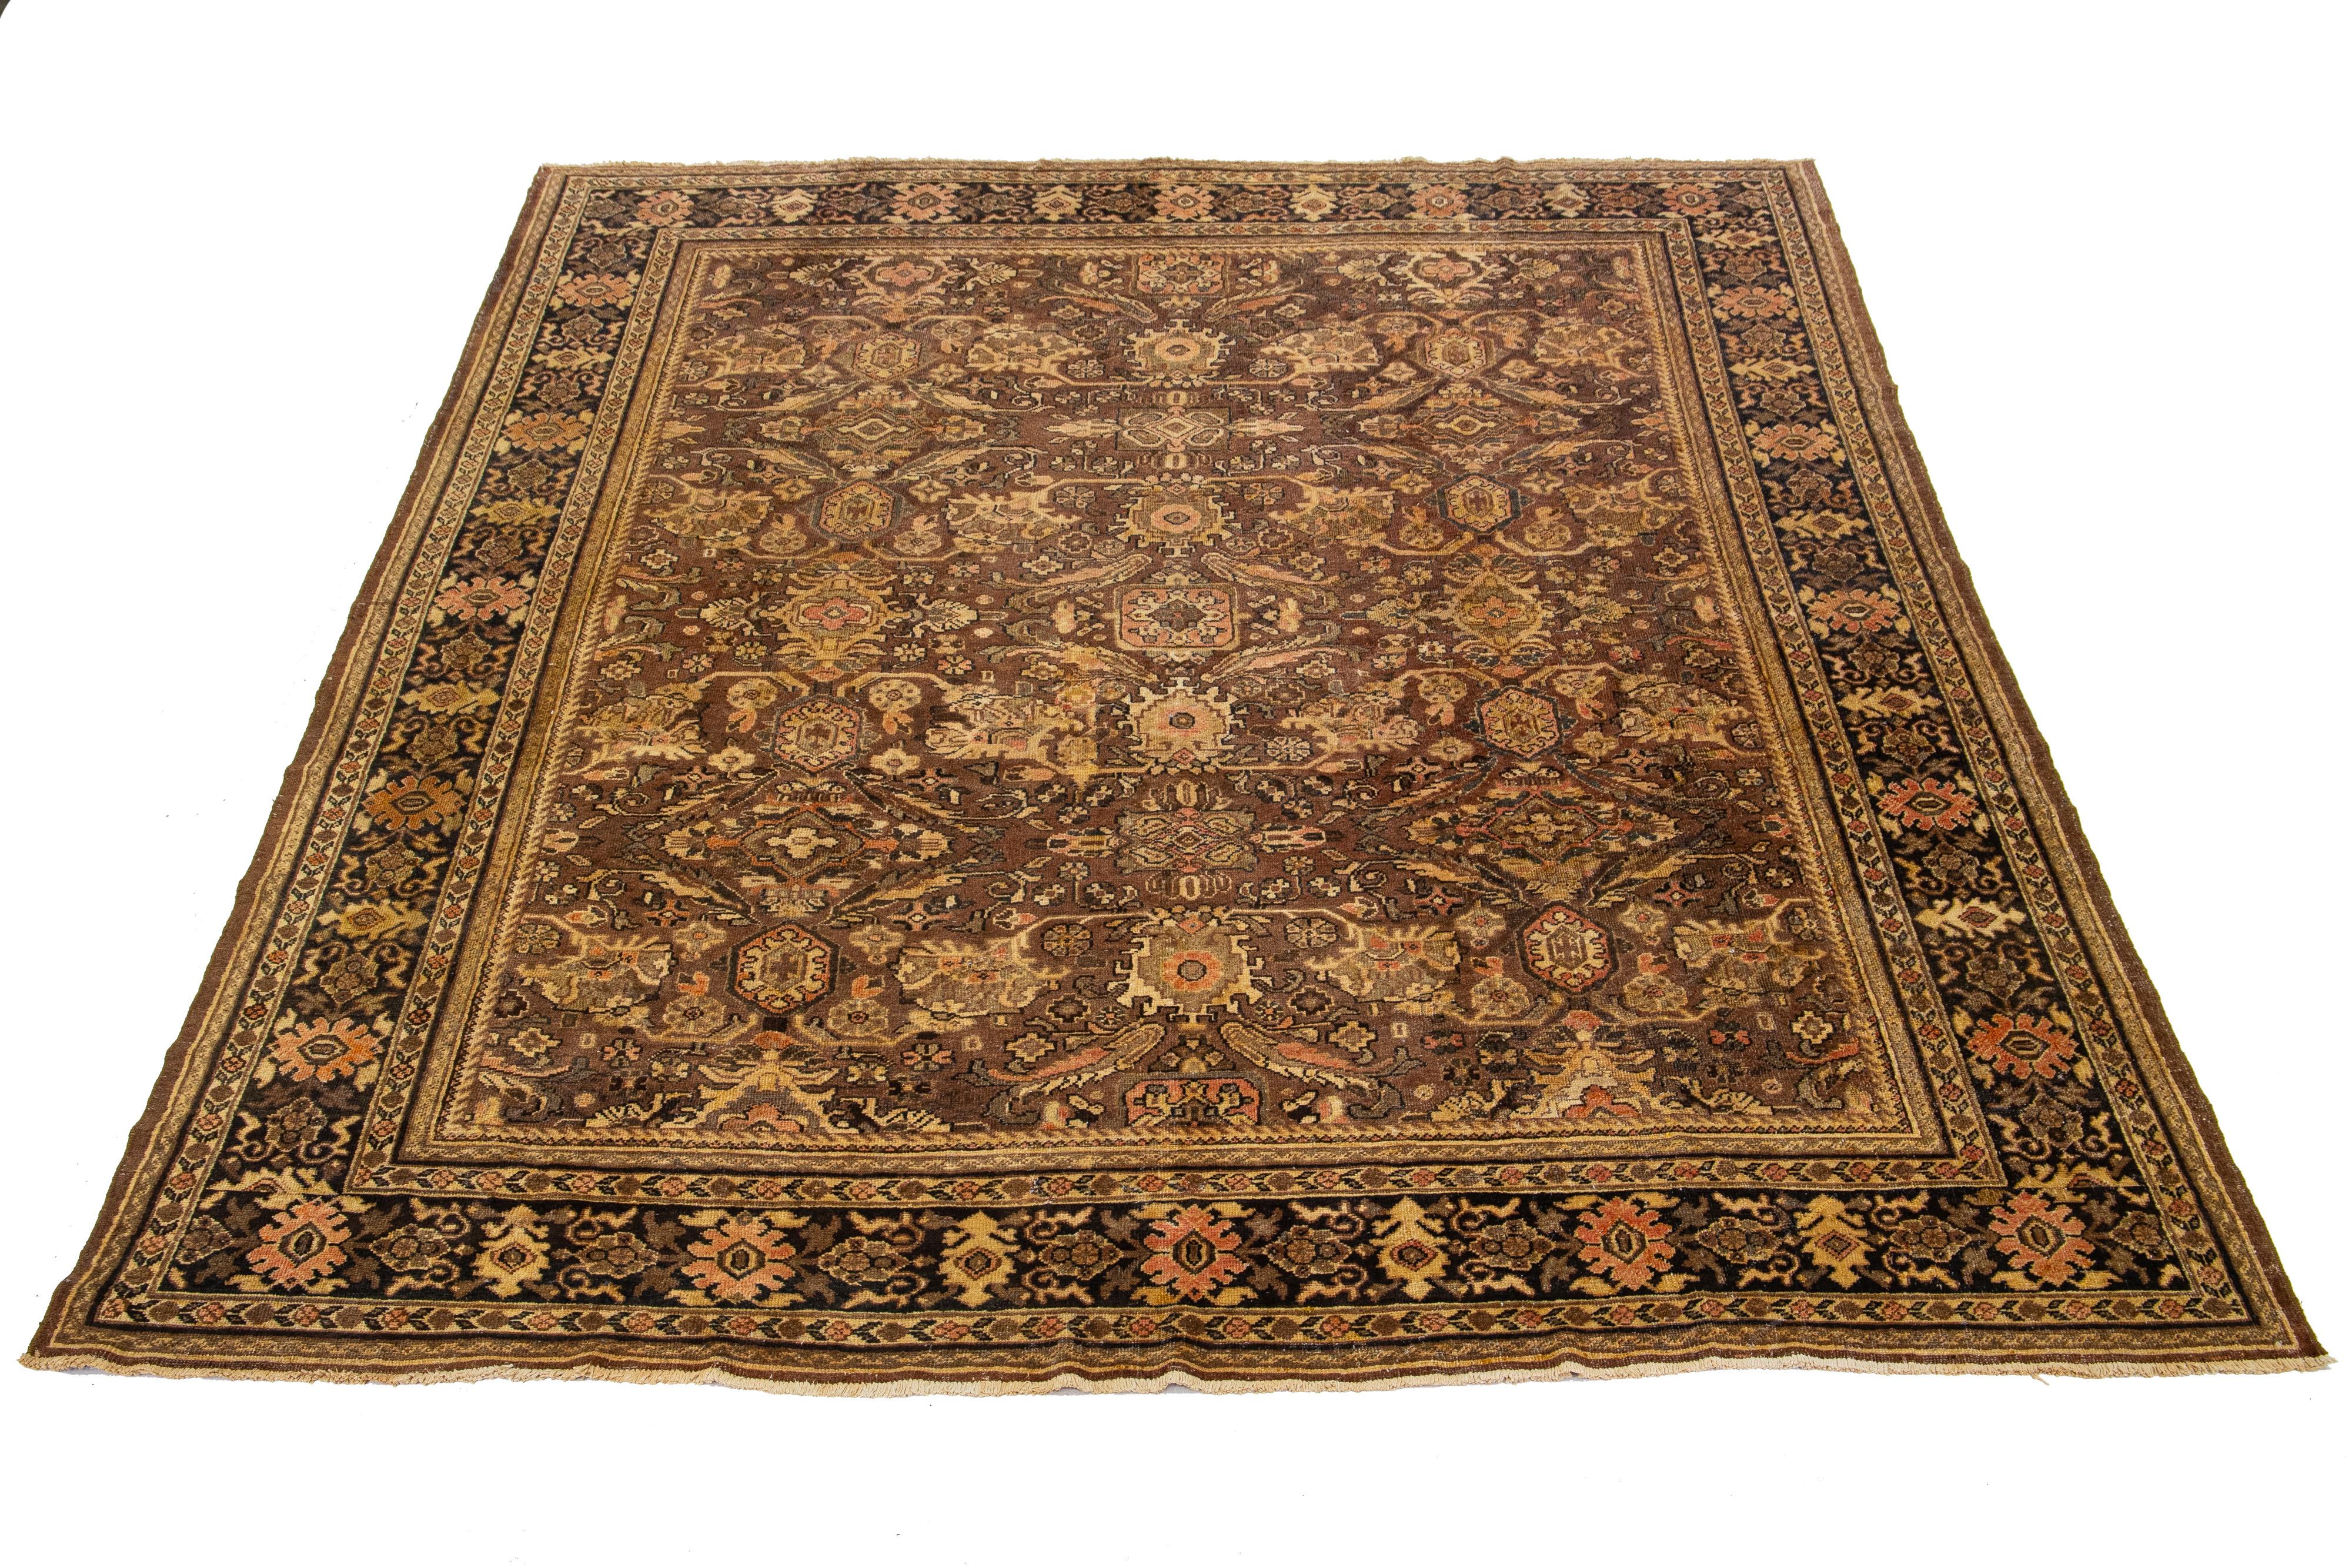 Beautiful Vintage Mahal hand-knotted wool rug with a brown color field. This Persian rug has a Classic blue, rust, and brown allover floral design.

This rug measures 9' x 11'9